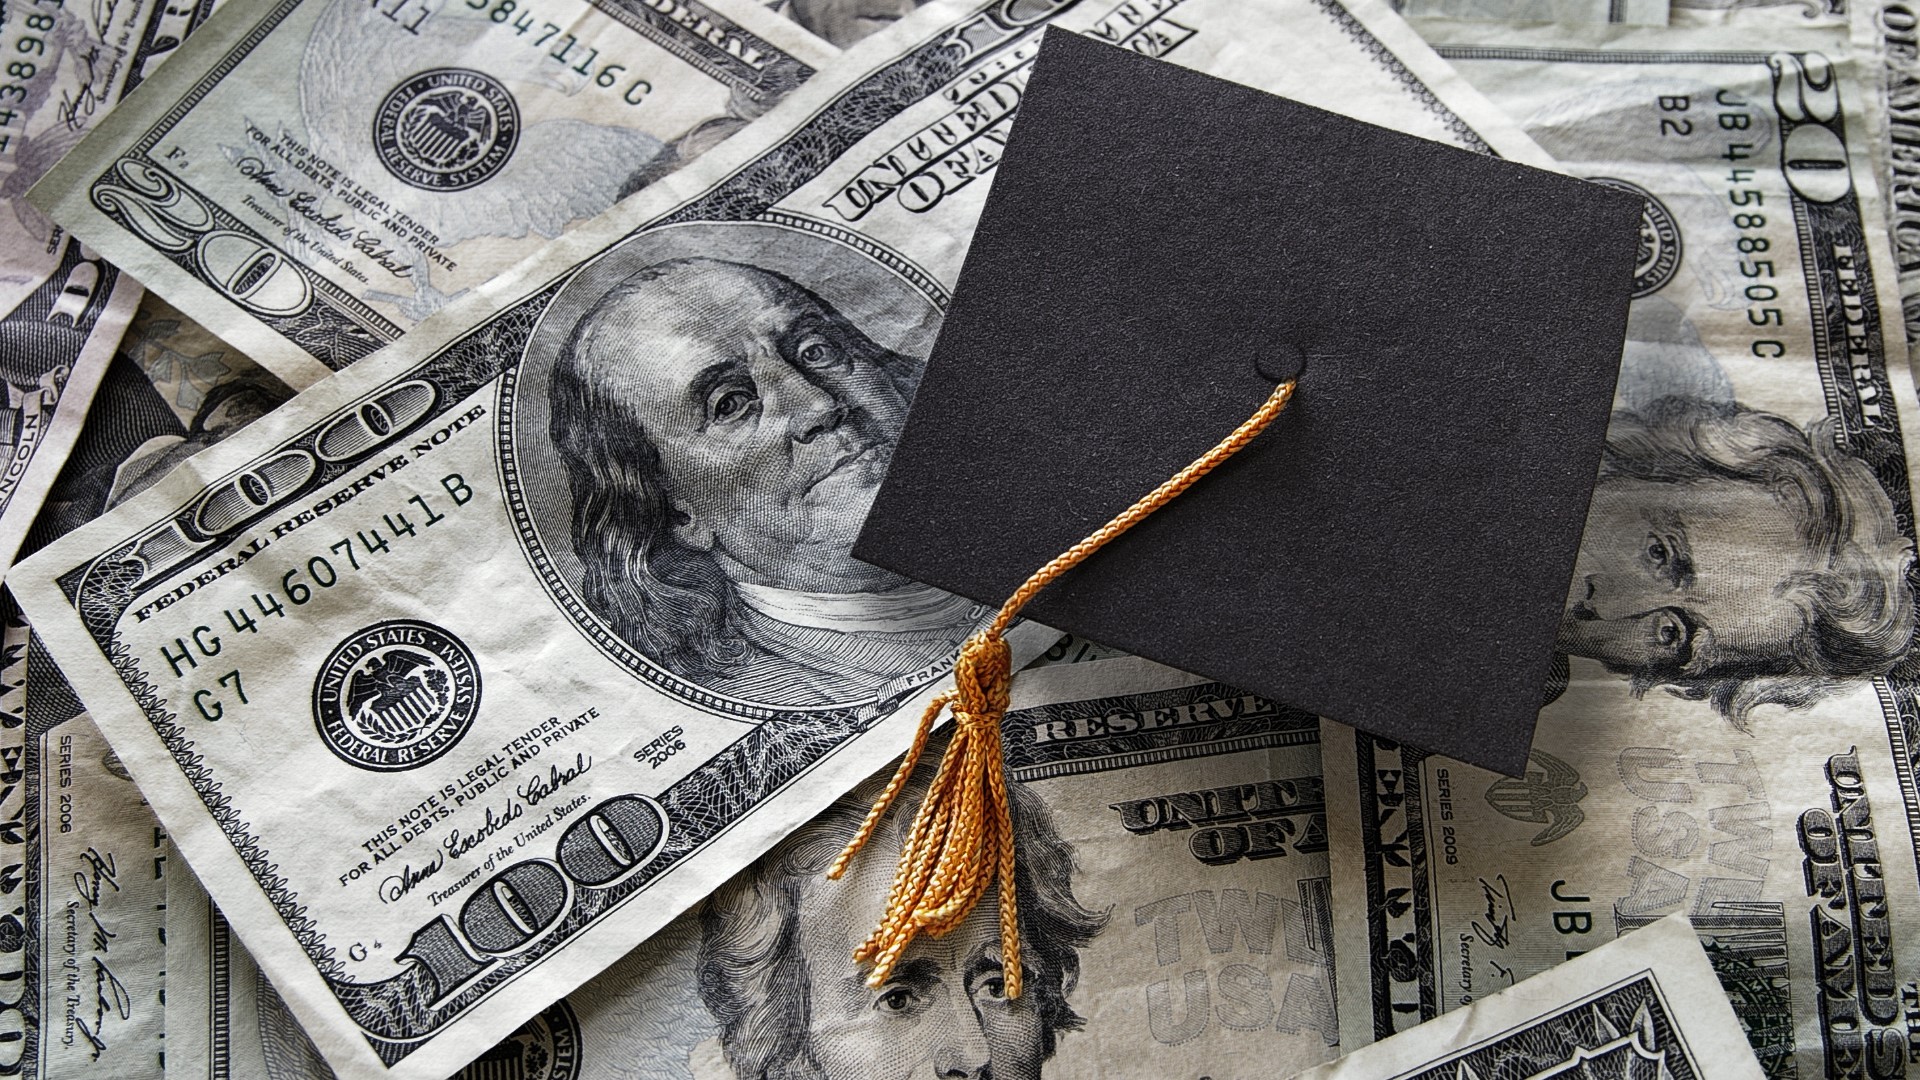 Mary Jo Lambert-Terry, managing partner with Yrefy, shared some tips on getting ready for student loan payments again.